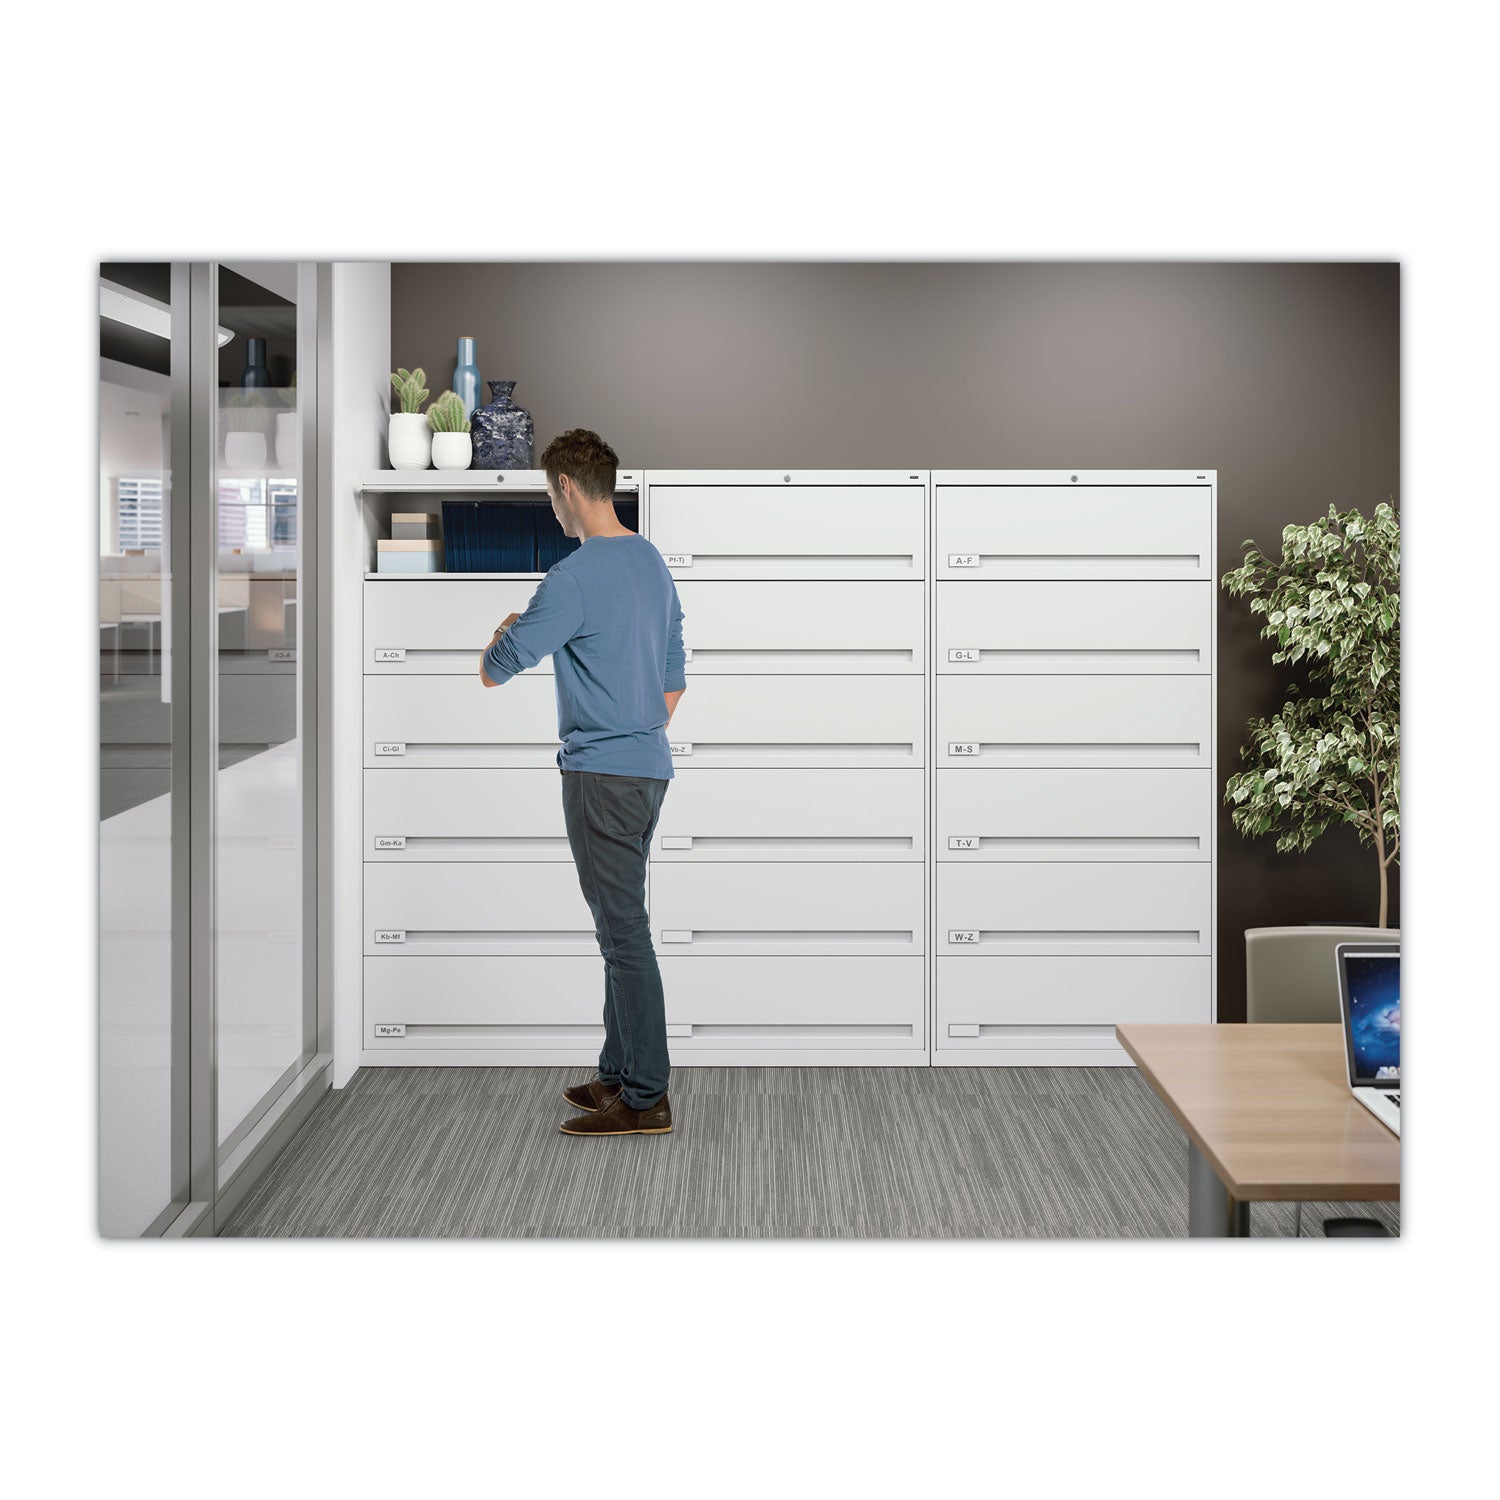 fixed-shelf-enclosed-format-lateral-file-for-end-tab-folders-5-legal-letter-file-shelves-light-gray-36-x-165-x-635_tnnfs351llgy - 2